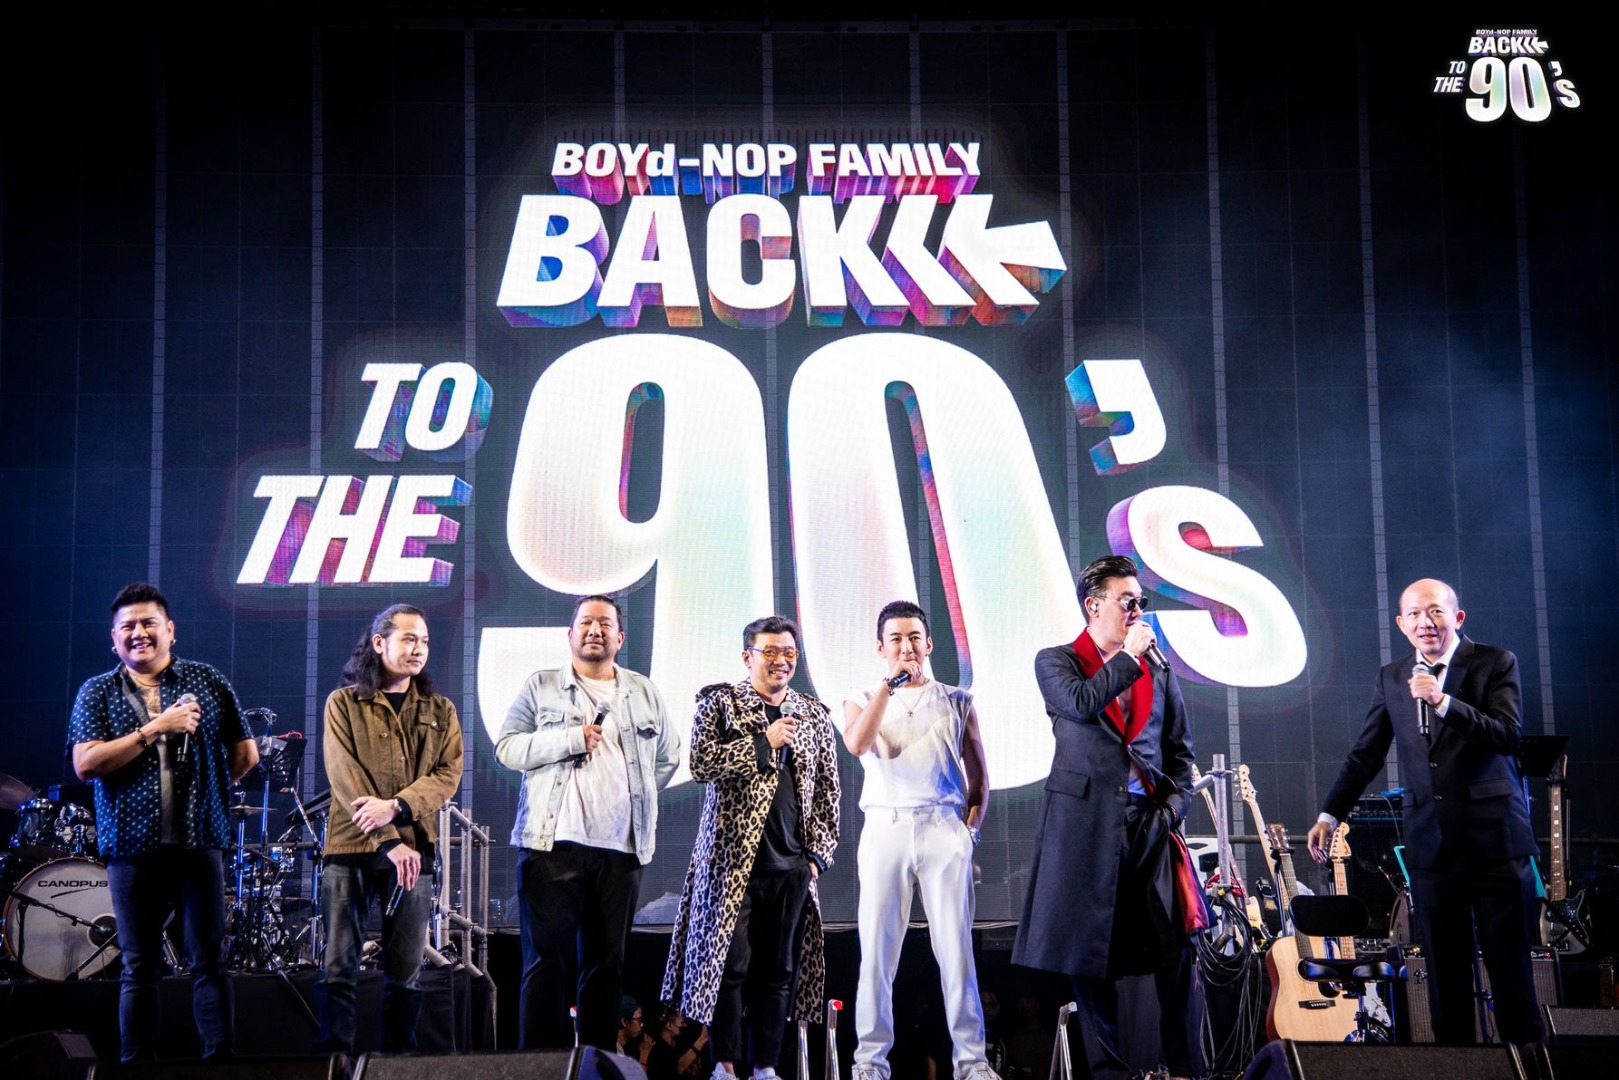 BOYd-NOP FAMILY : BACK TO THE 90’s CONCERT